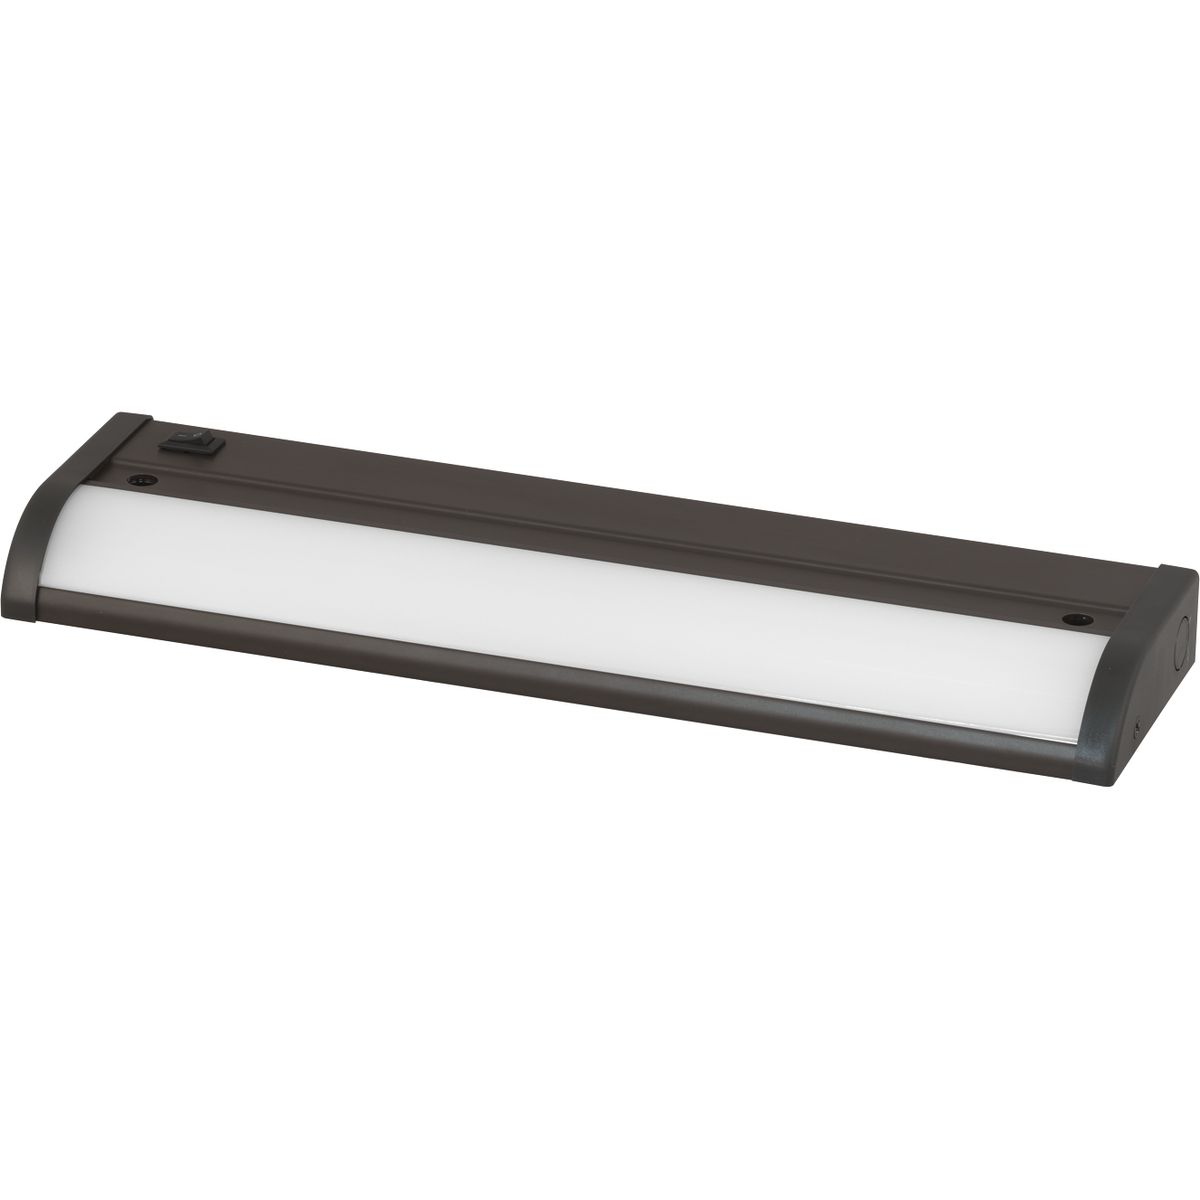 The HIDE-A-LITE V 11-1/2 in  linear undercabinet fixture provides the ideal solution for residential and light commercial applications. Extruded aluminum construction featuring a lens design to optimizes light distribution to ensure proper illumination. The HIDE-A-LITE V series utilizes a simple mounting method, and direct wiring, for a hassle free installation. Energy efficient and functional lighting, which can be dimmed down to 10 percent with many Forward Phase Triac and Electronic Low Voltage ELV dimmers. 12 in linear undercabinet fixture. Antique Bronze powder coat finish.